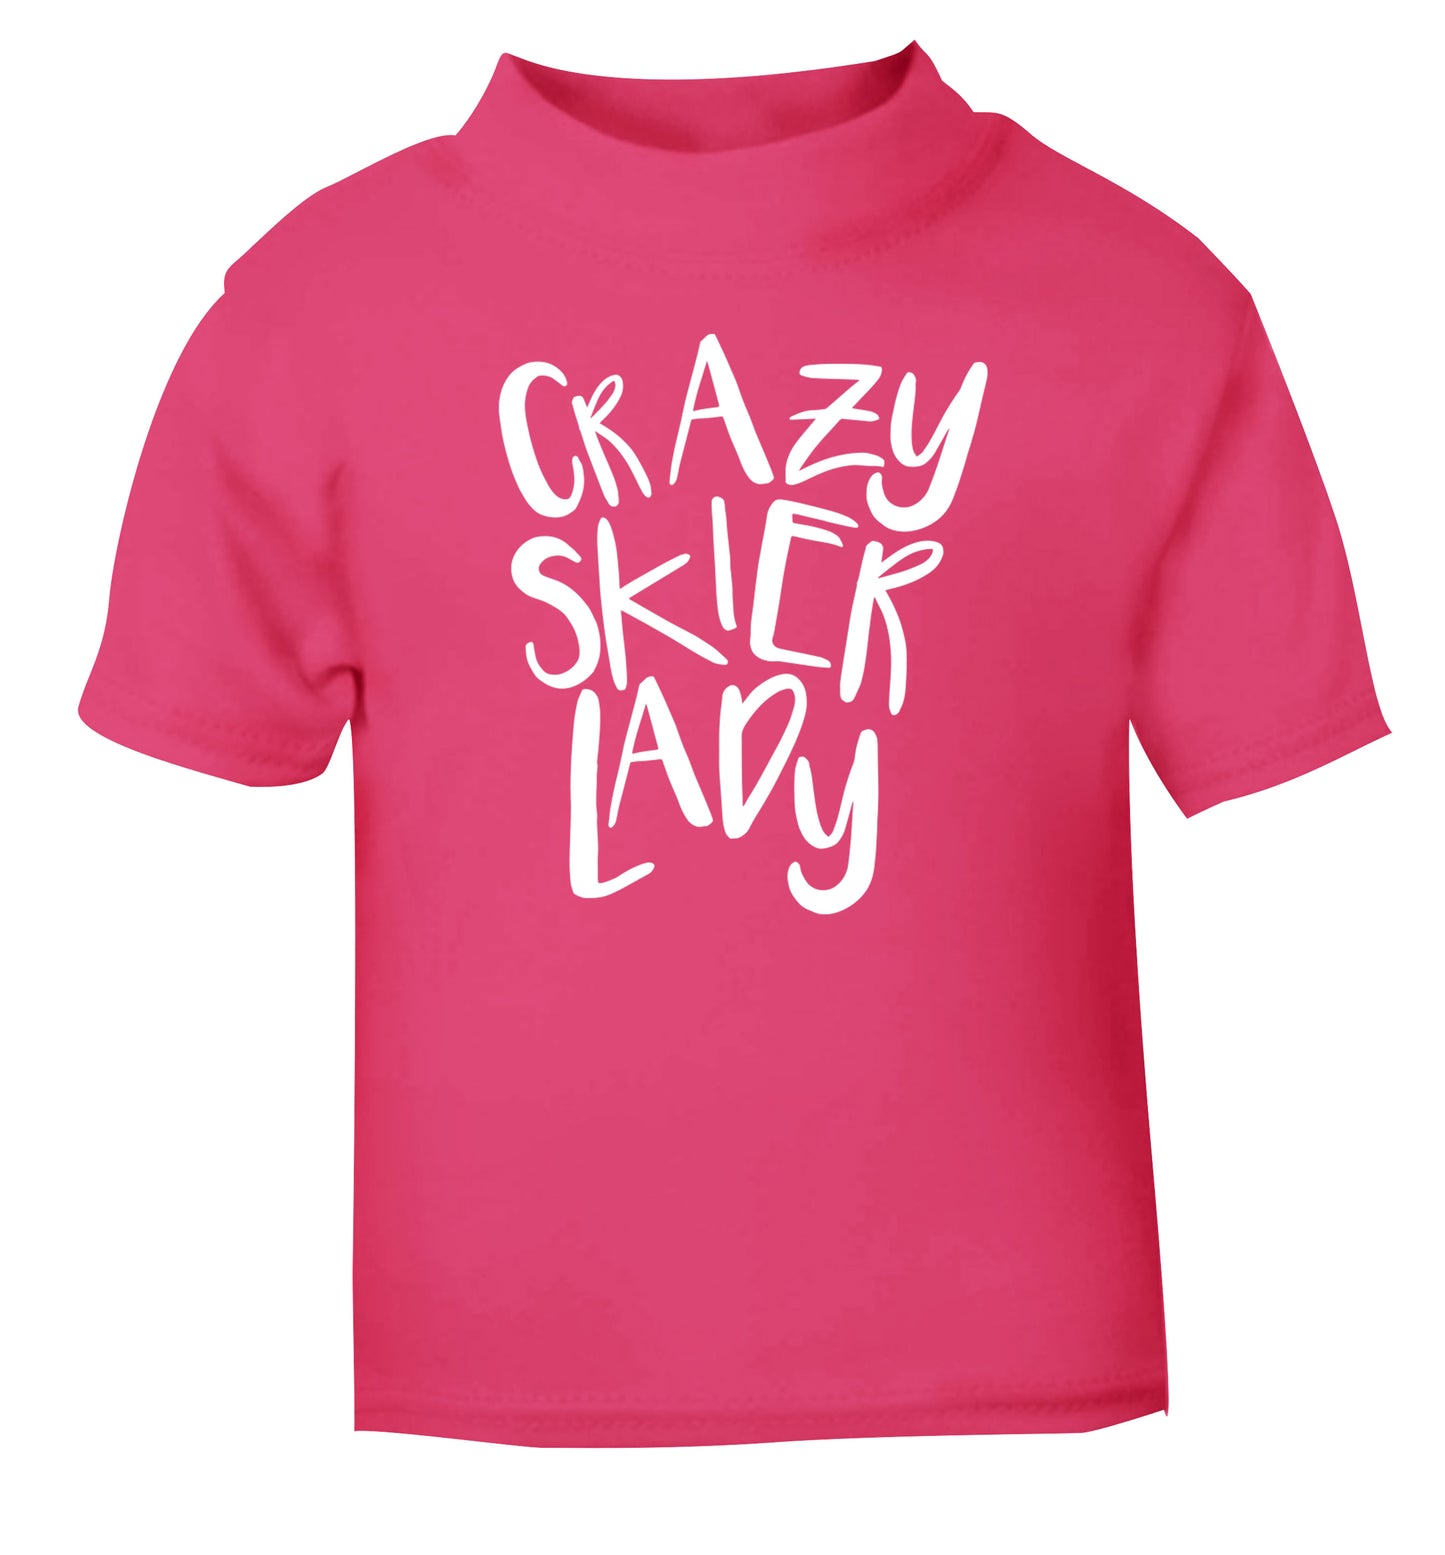 Crazy skier lady pink Baby Toddler Tshirt 2 Years